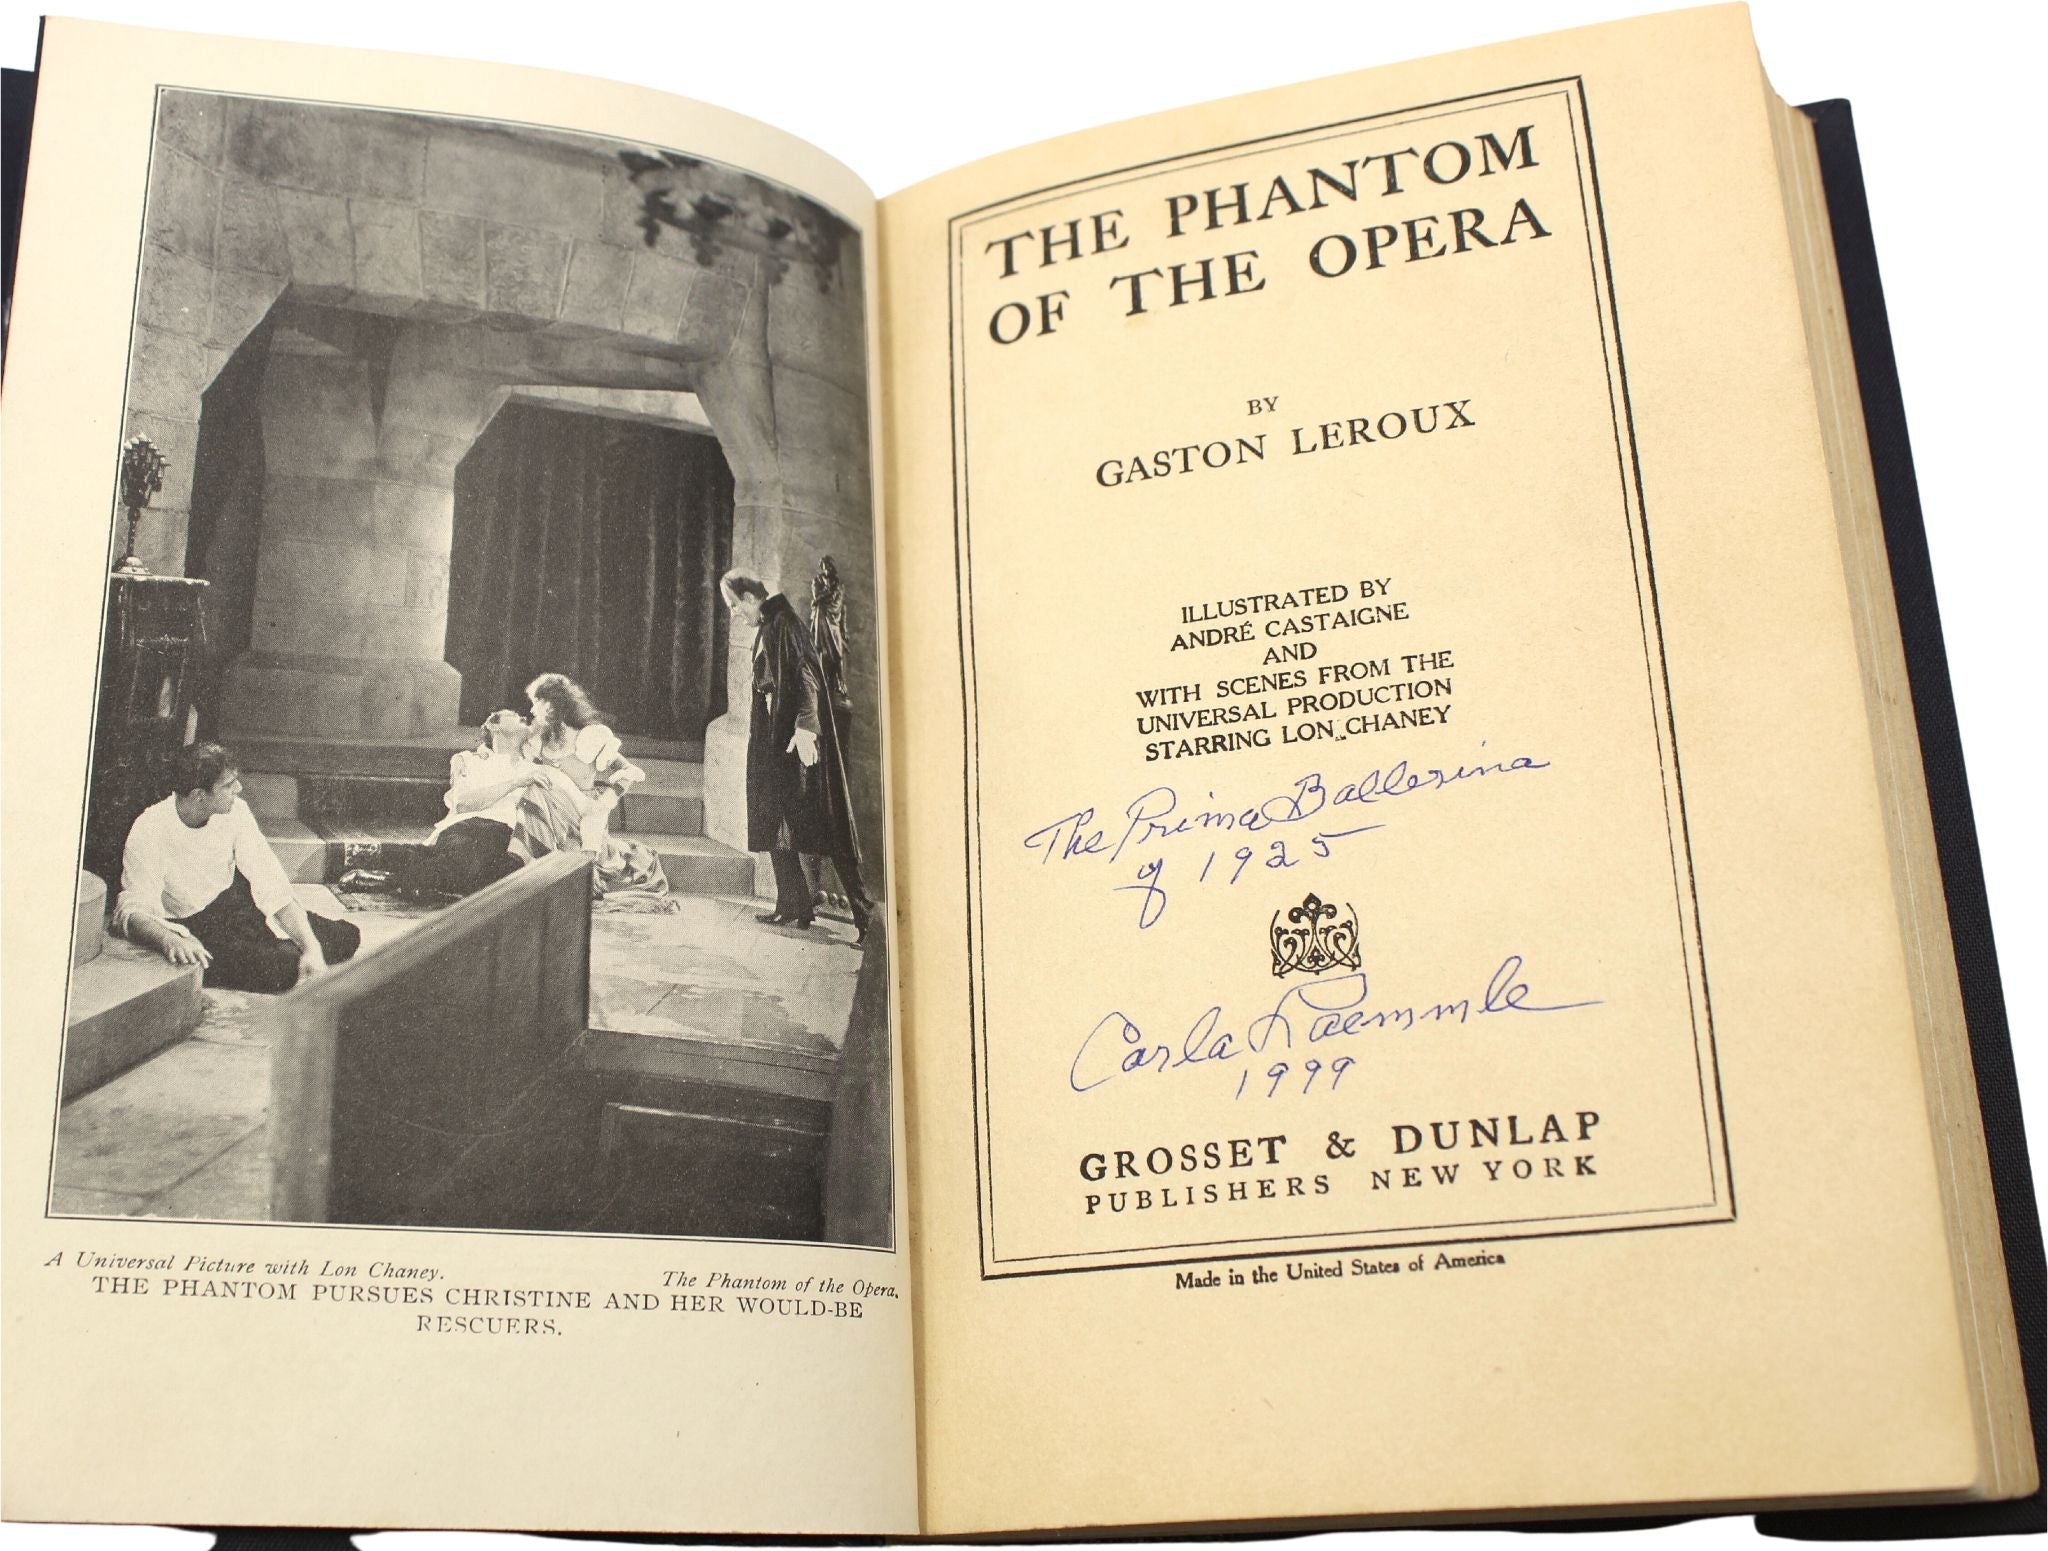 The Phantom of the Opera by Gaston Leroux, Signed by Actress Carla Laemmle, Photoplay Edition, 1925 - The Great Republic